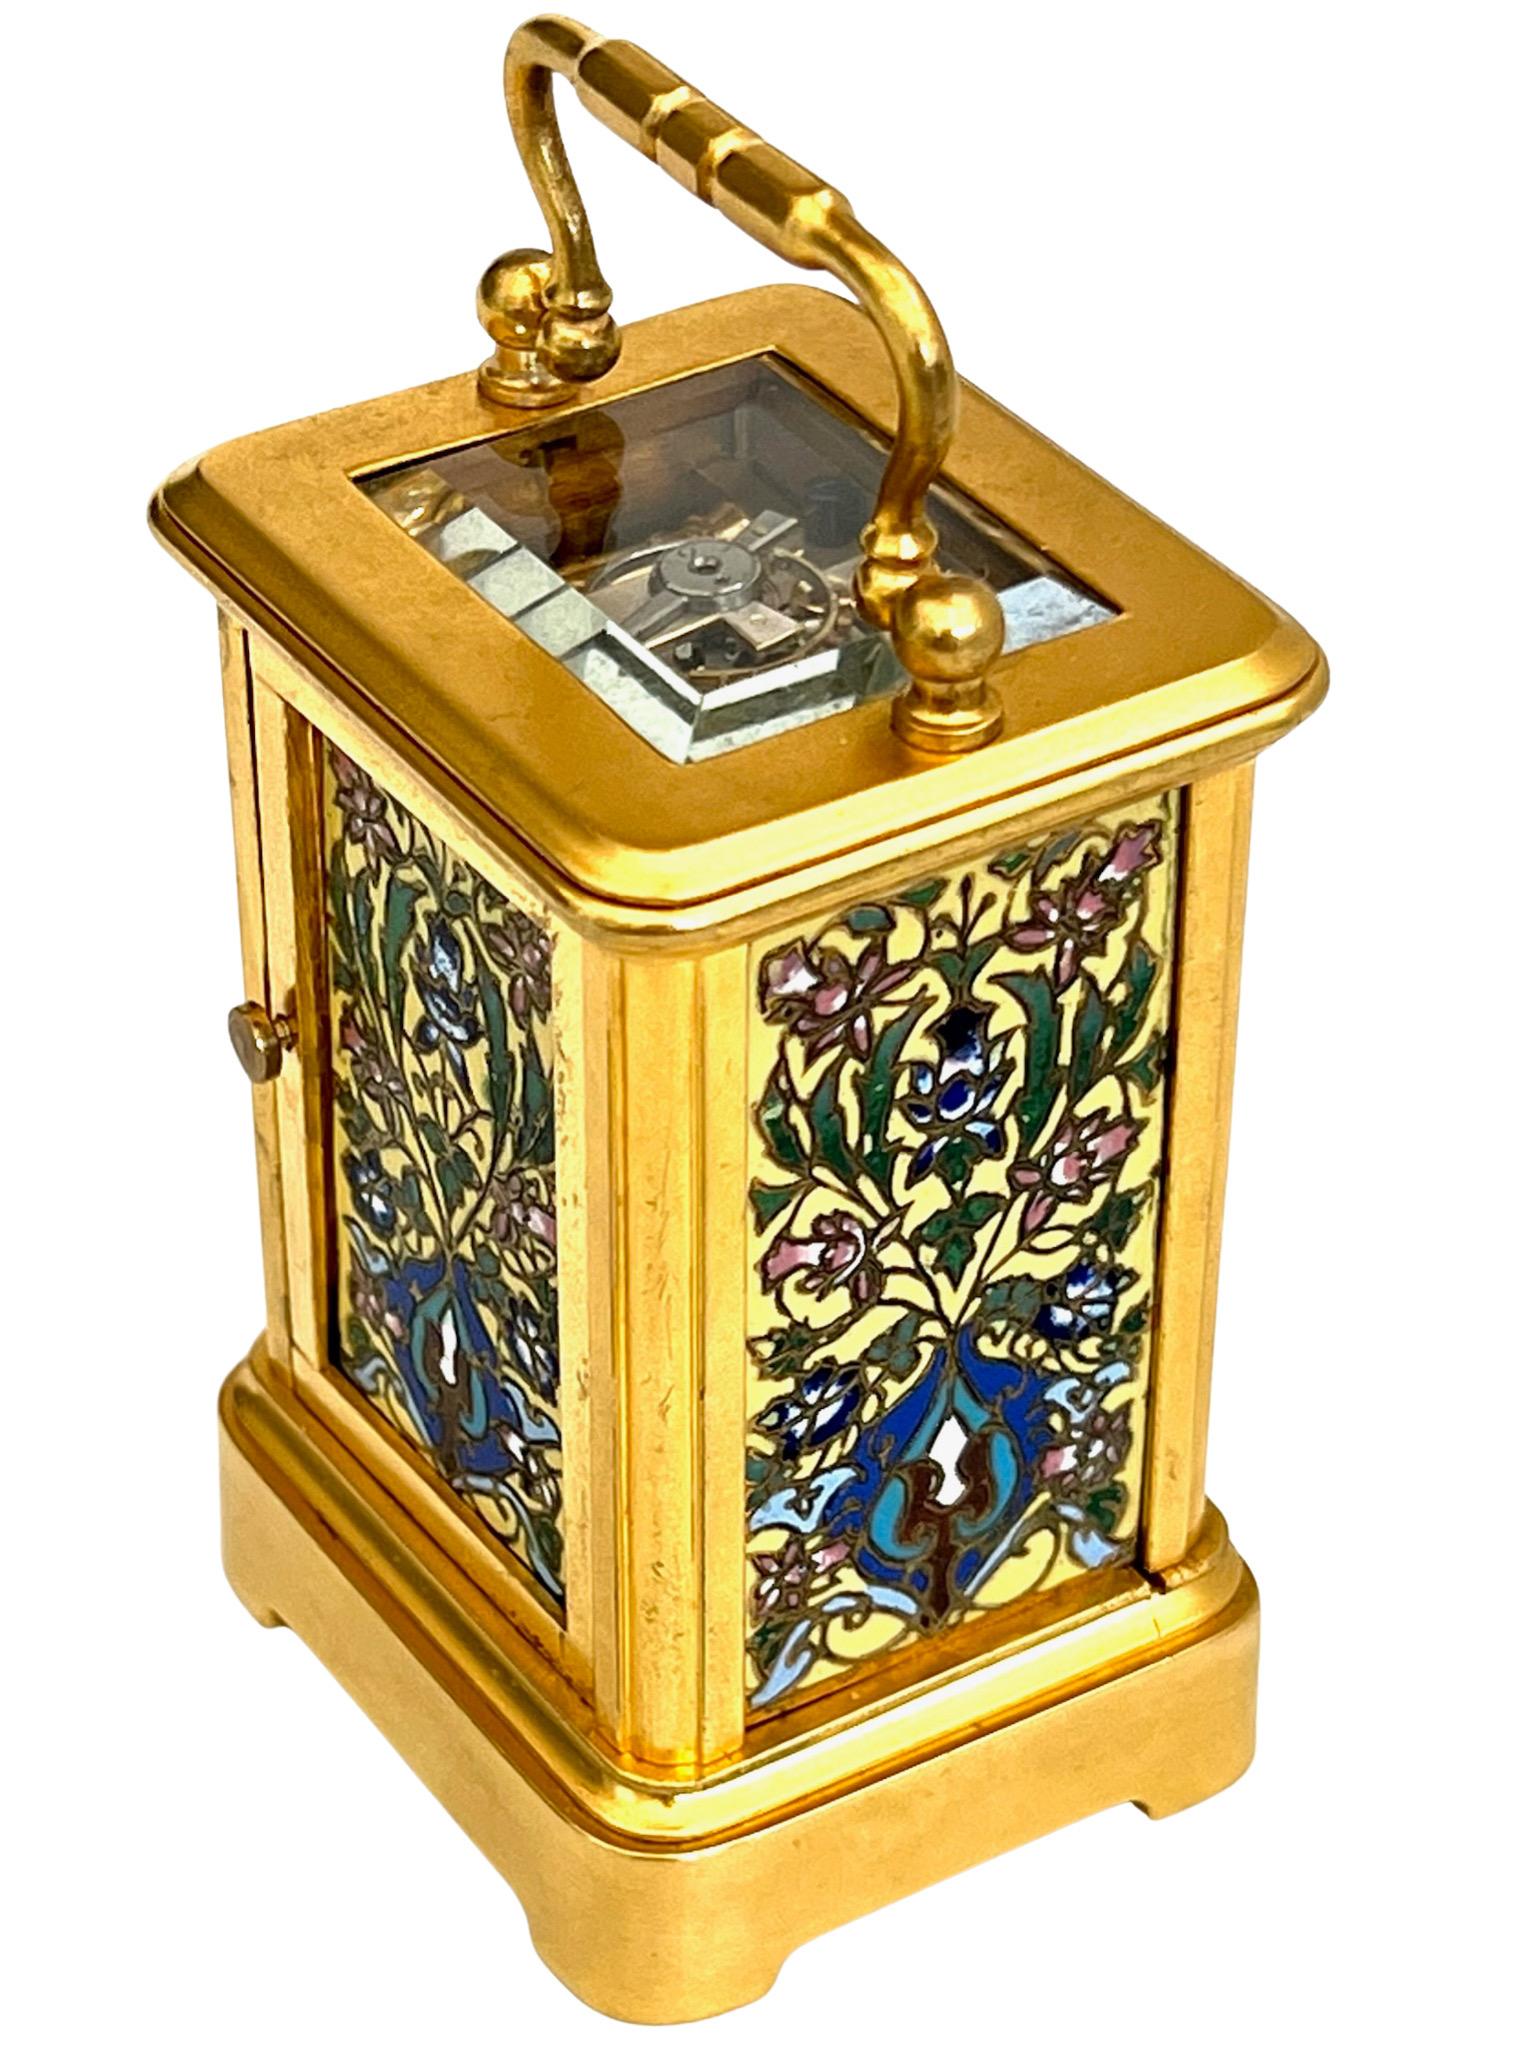 French Miniature Timepiece 8 Day Carriage Clock With Champlevé Enamel Panels For Sale 11